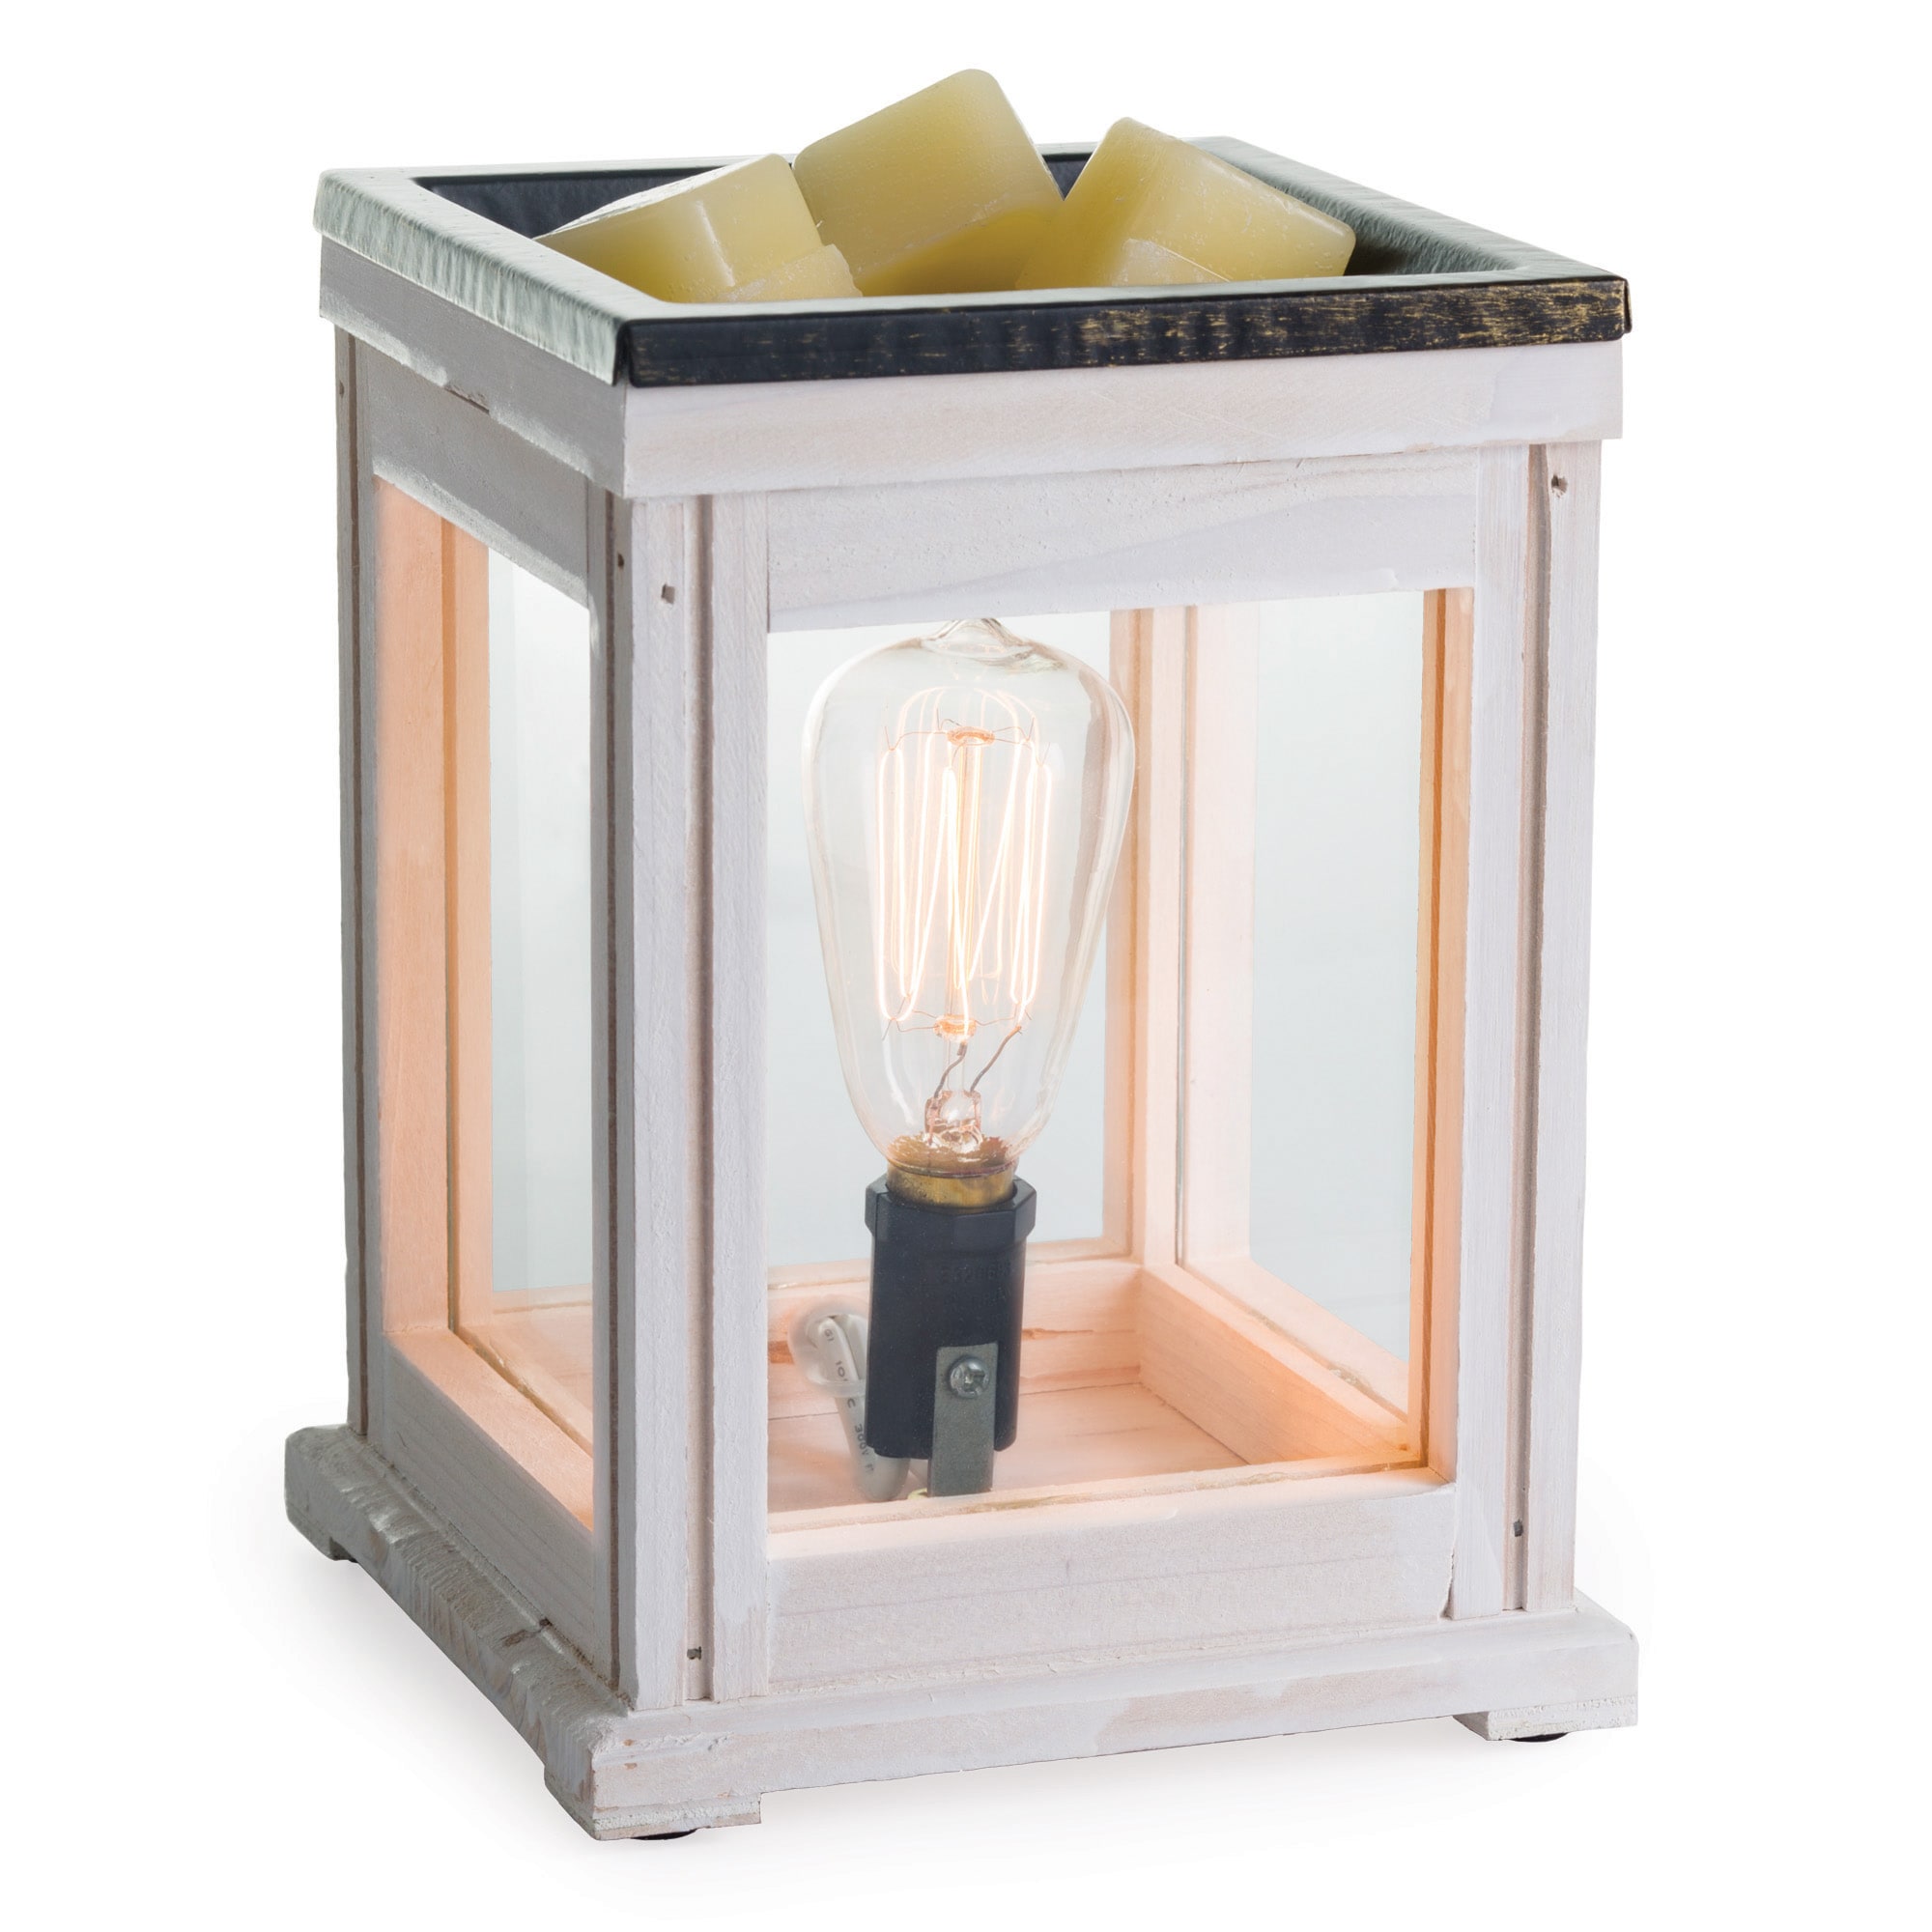 LUXGARDEN Electric Candle Warmer Lamp Wood Lamp Candle Wax Melt